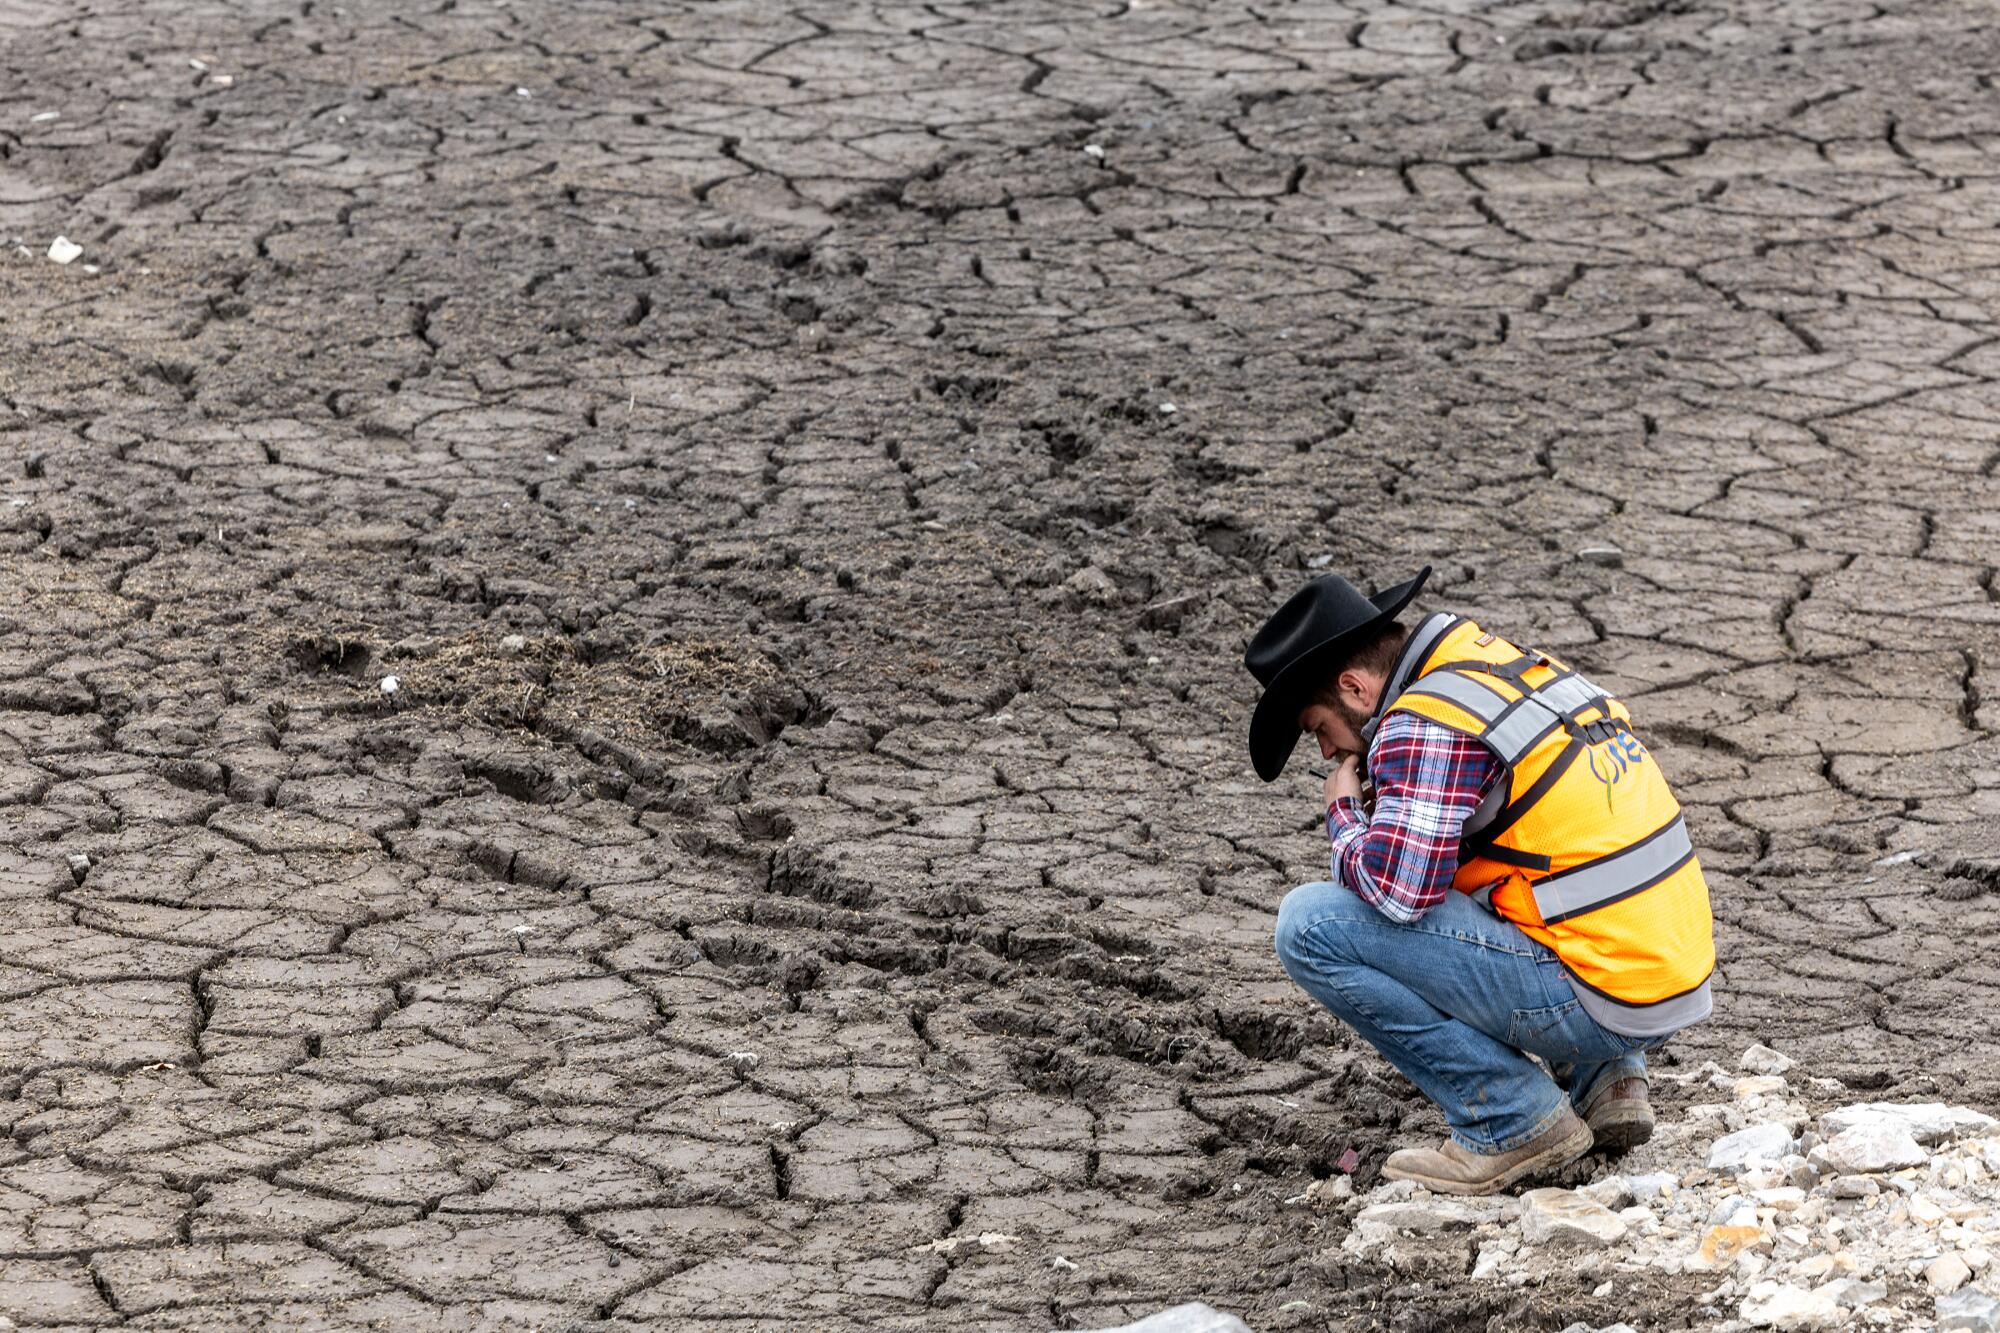 A man in a yellow safety vest squats on a dry spot next to footprints in an expanse of cracked mud, looking down